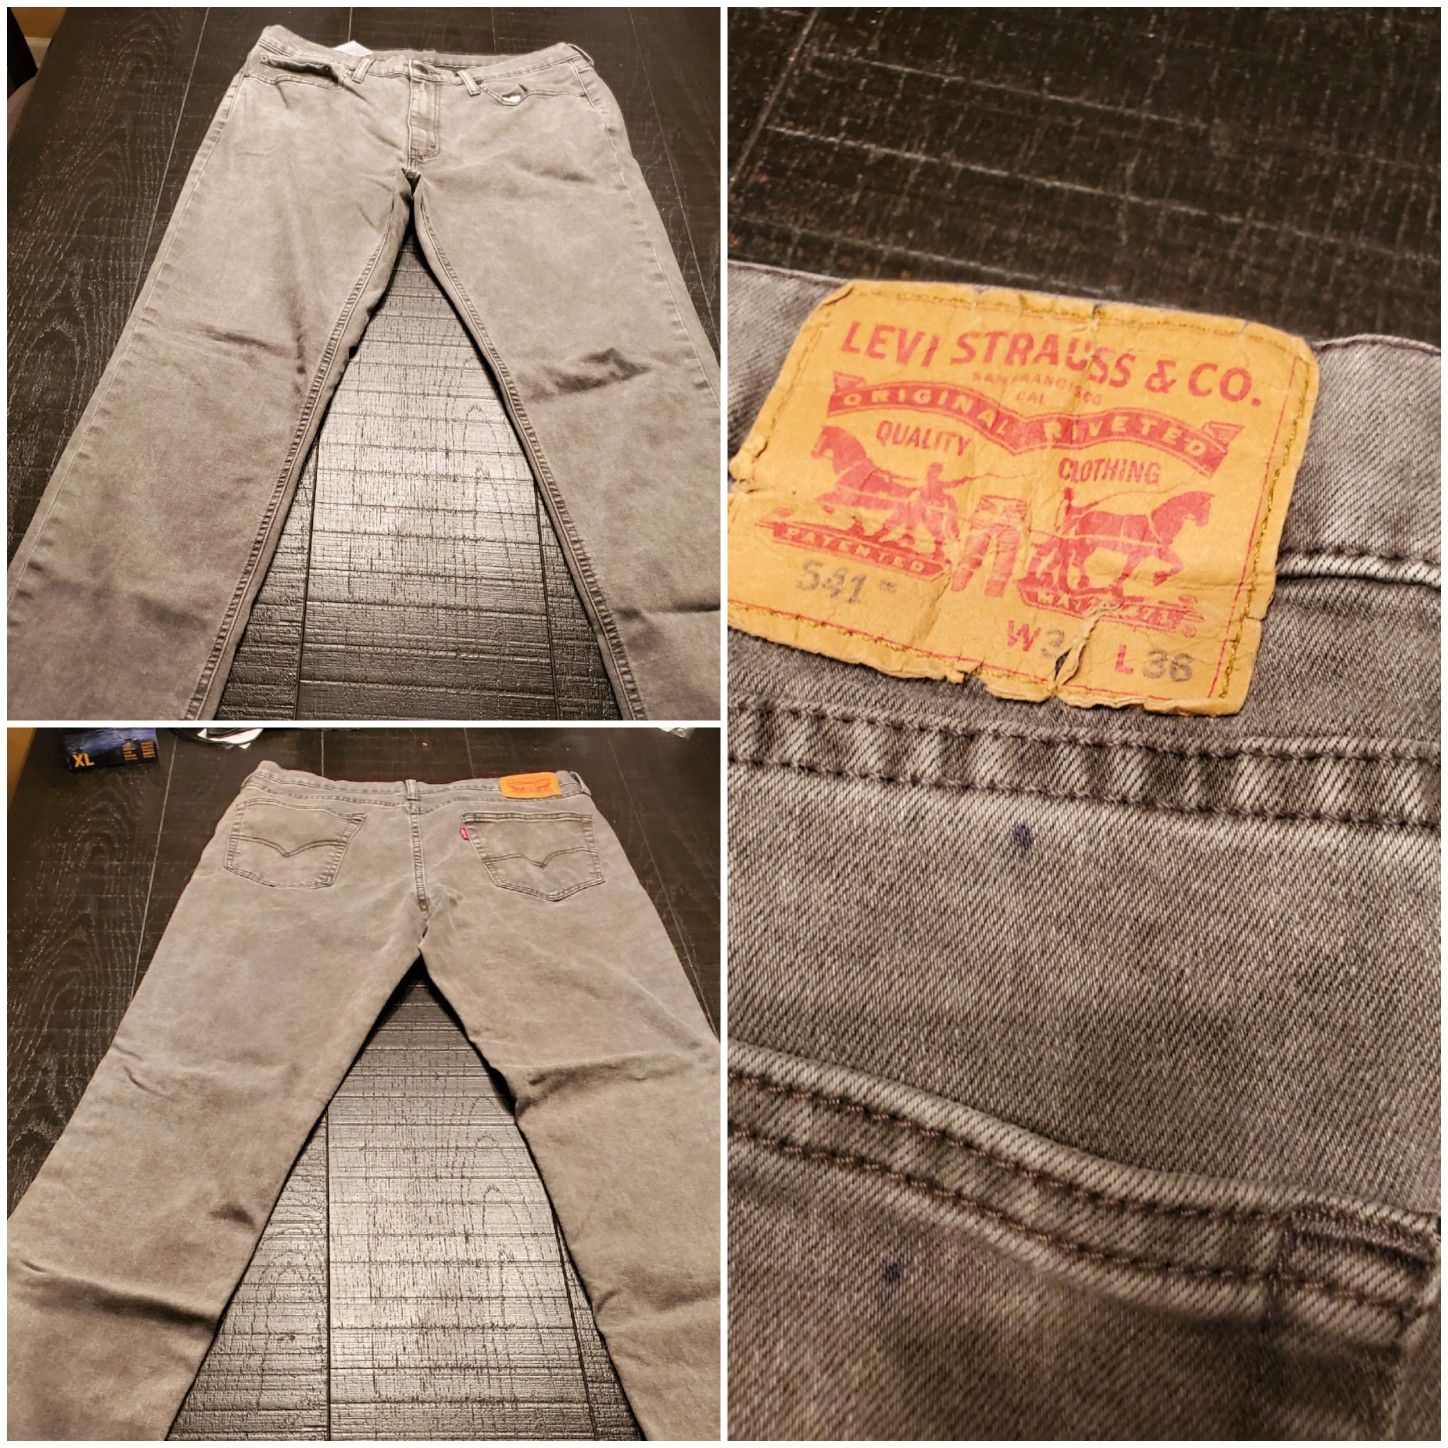 Men's jeans. 5 pairs of Levi's and one pair of Lucky Brand jeans. Sizes range between 36×34 and 36x36.